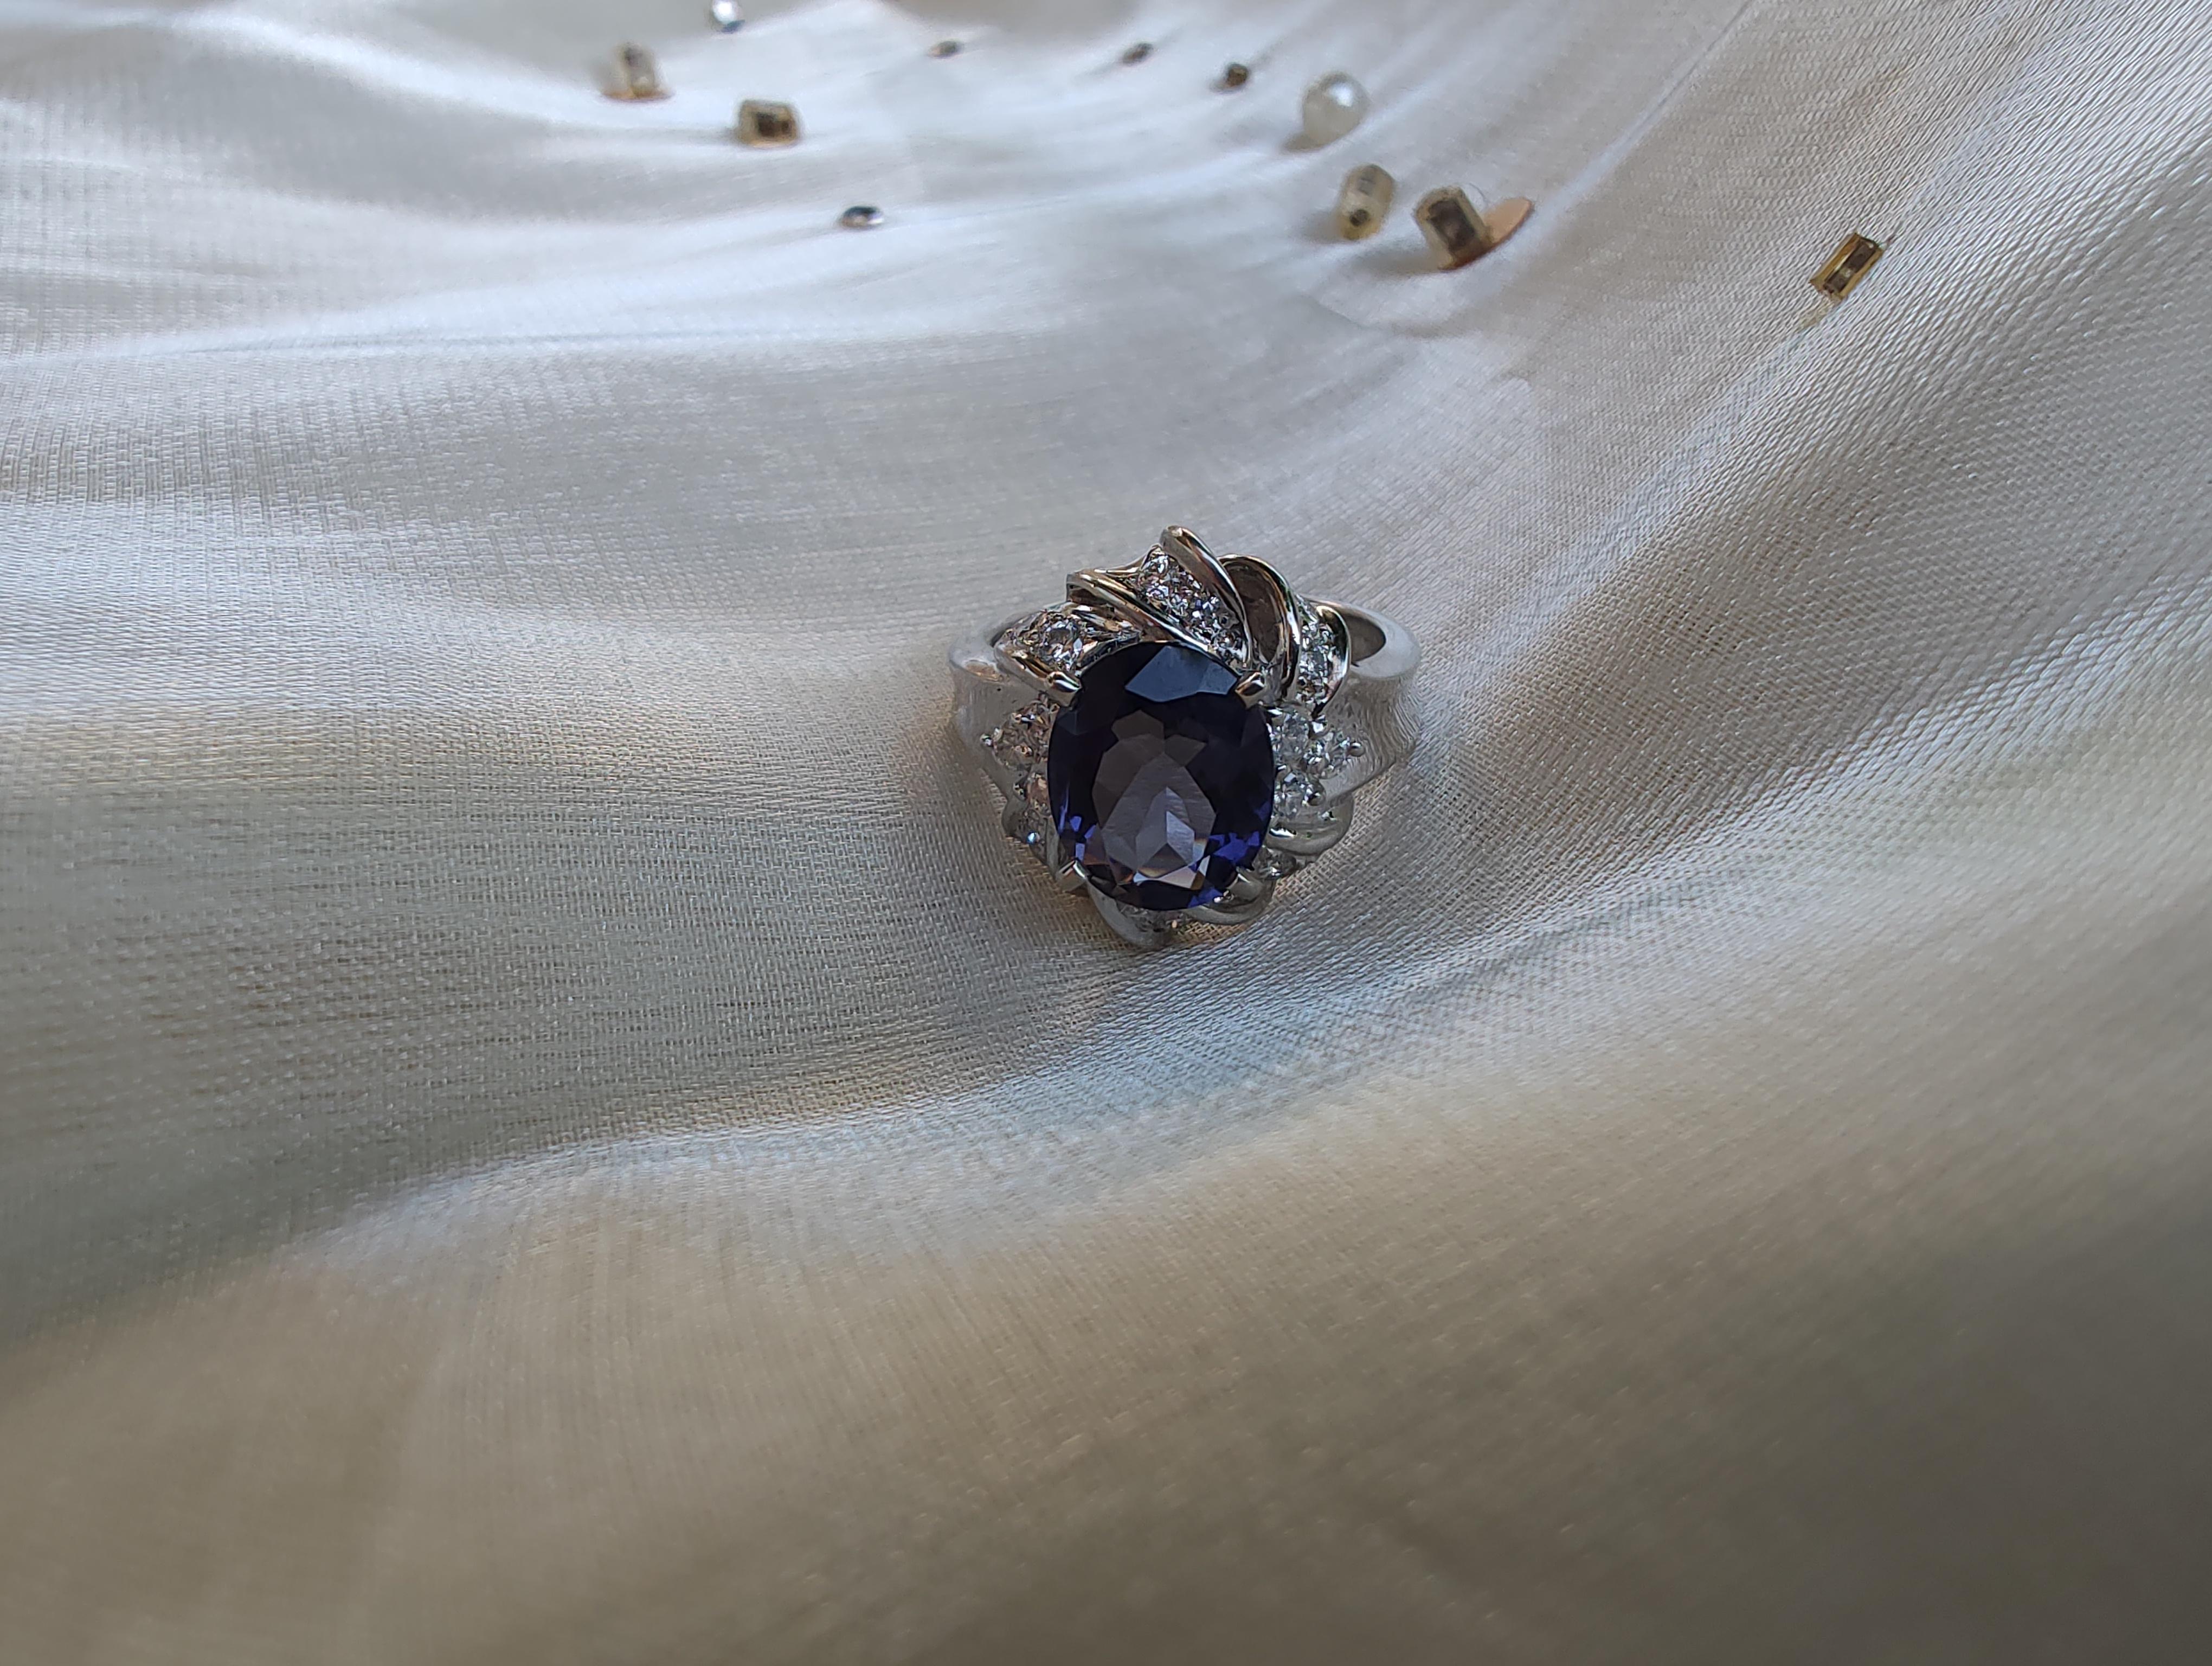 Iolite is named after the Greek word 